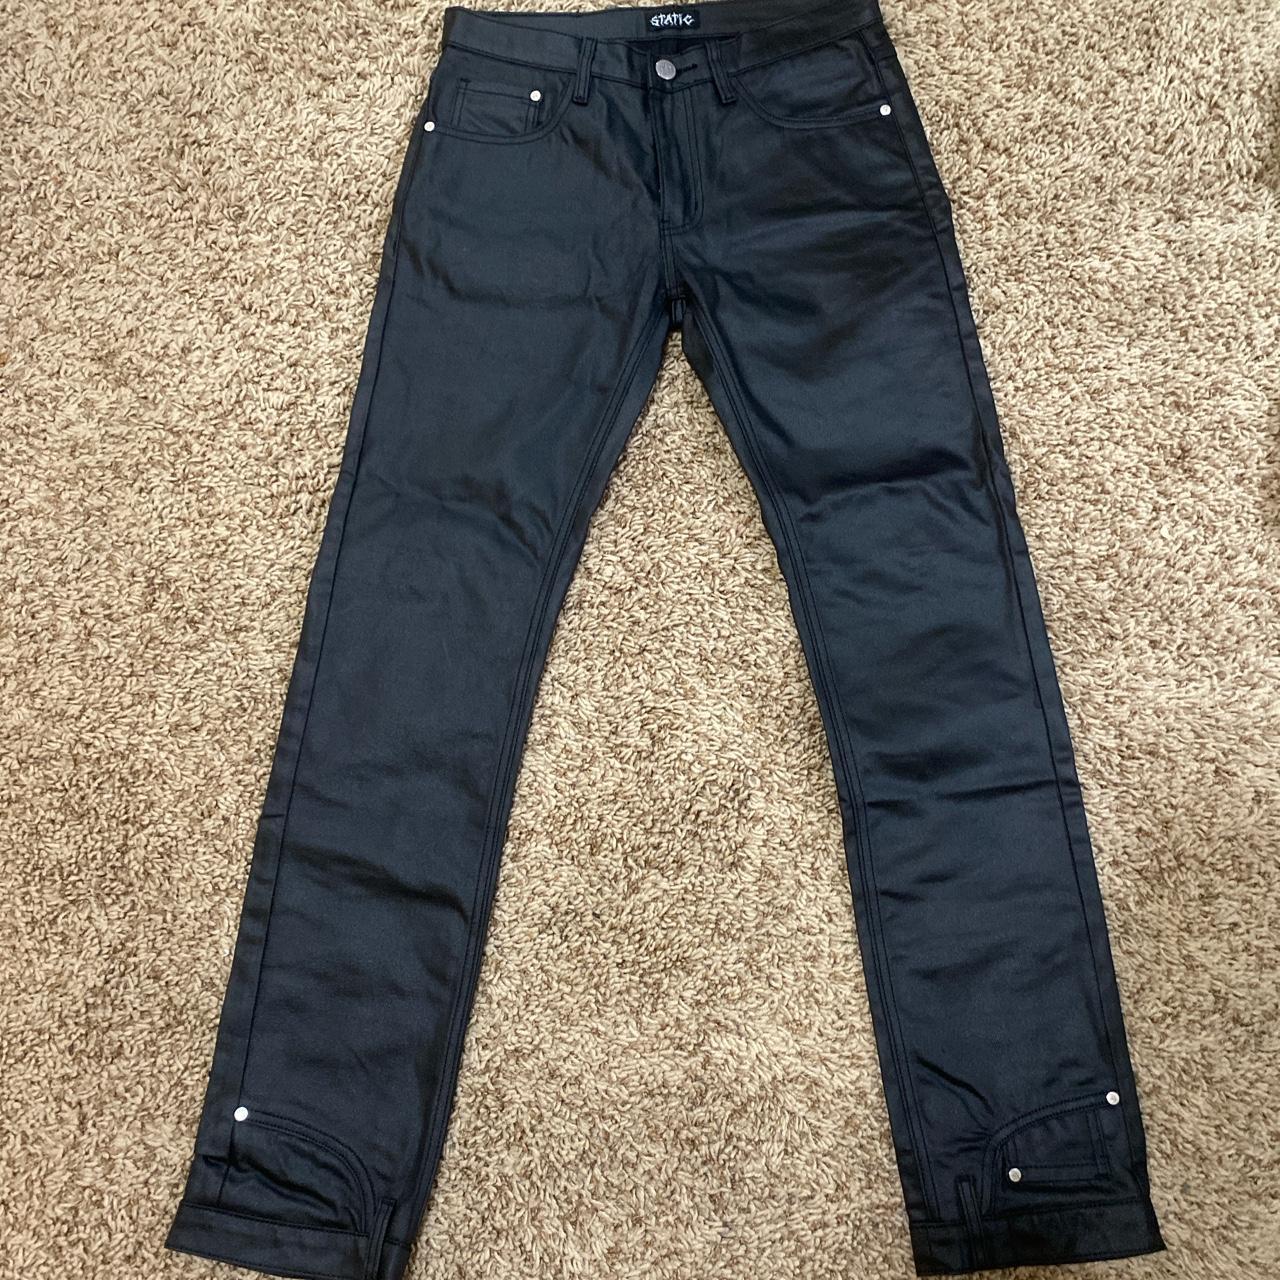 Wax jeans (stacked) never worn before size 30 brand... - Depop